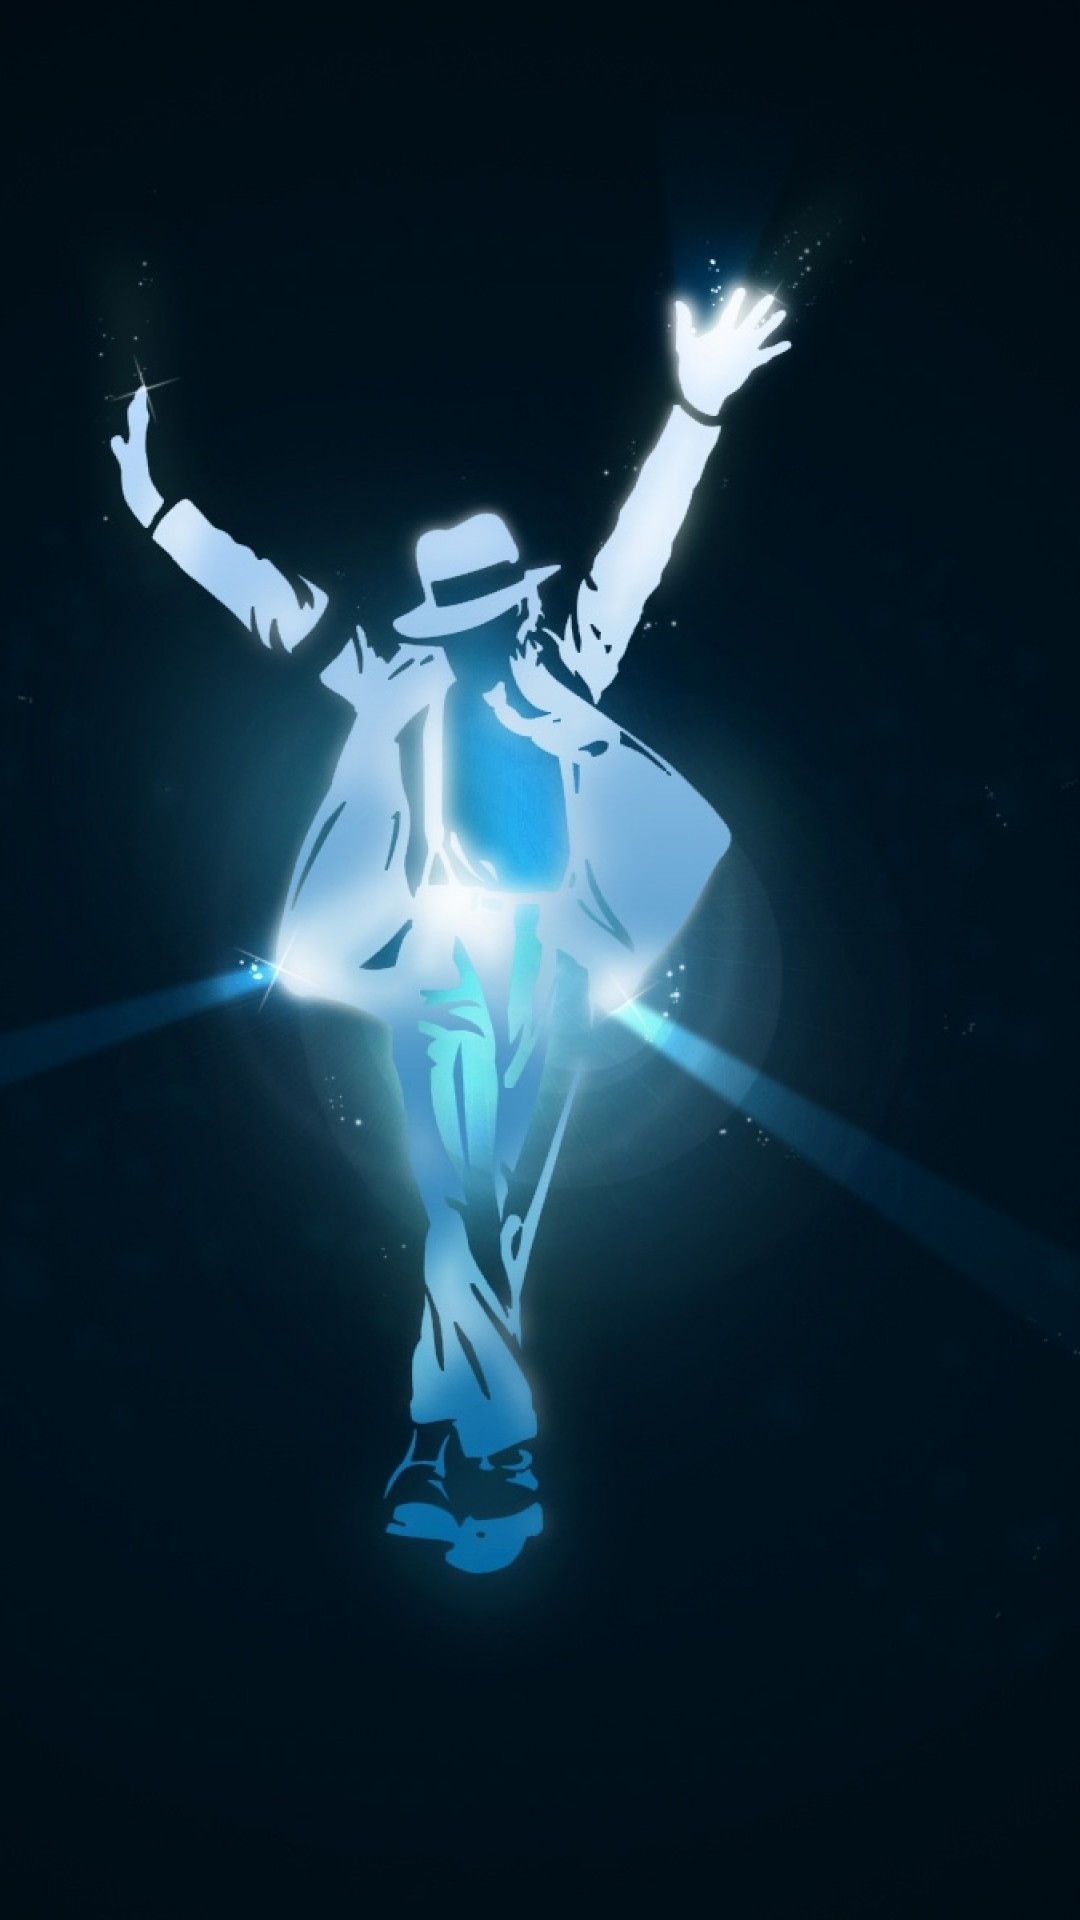 Michael Jackson Style Hd Wallpaper for Desktop and Mobiles iPhone 6 / 6S  Plus - HD Wallpaper 